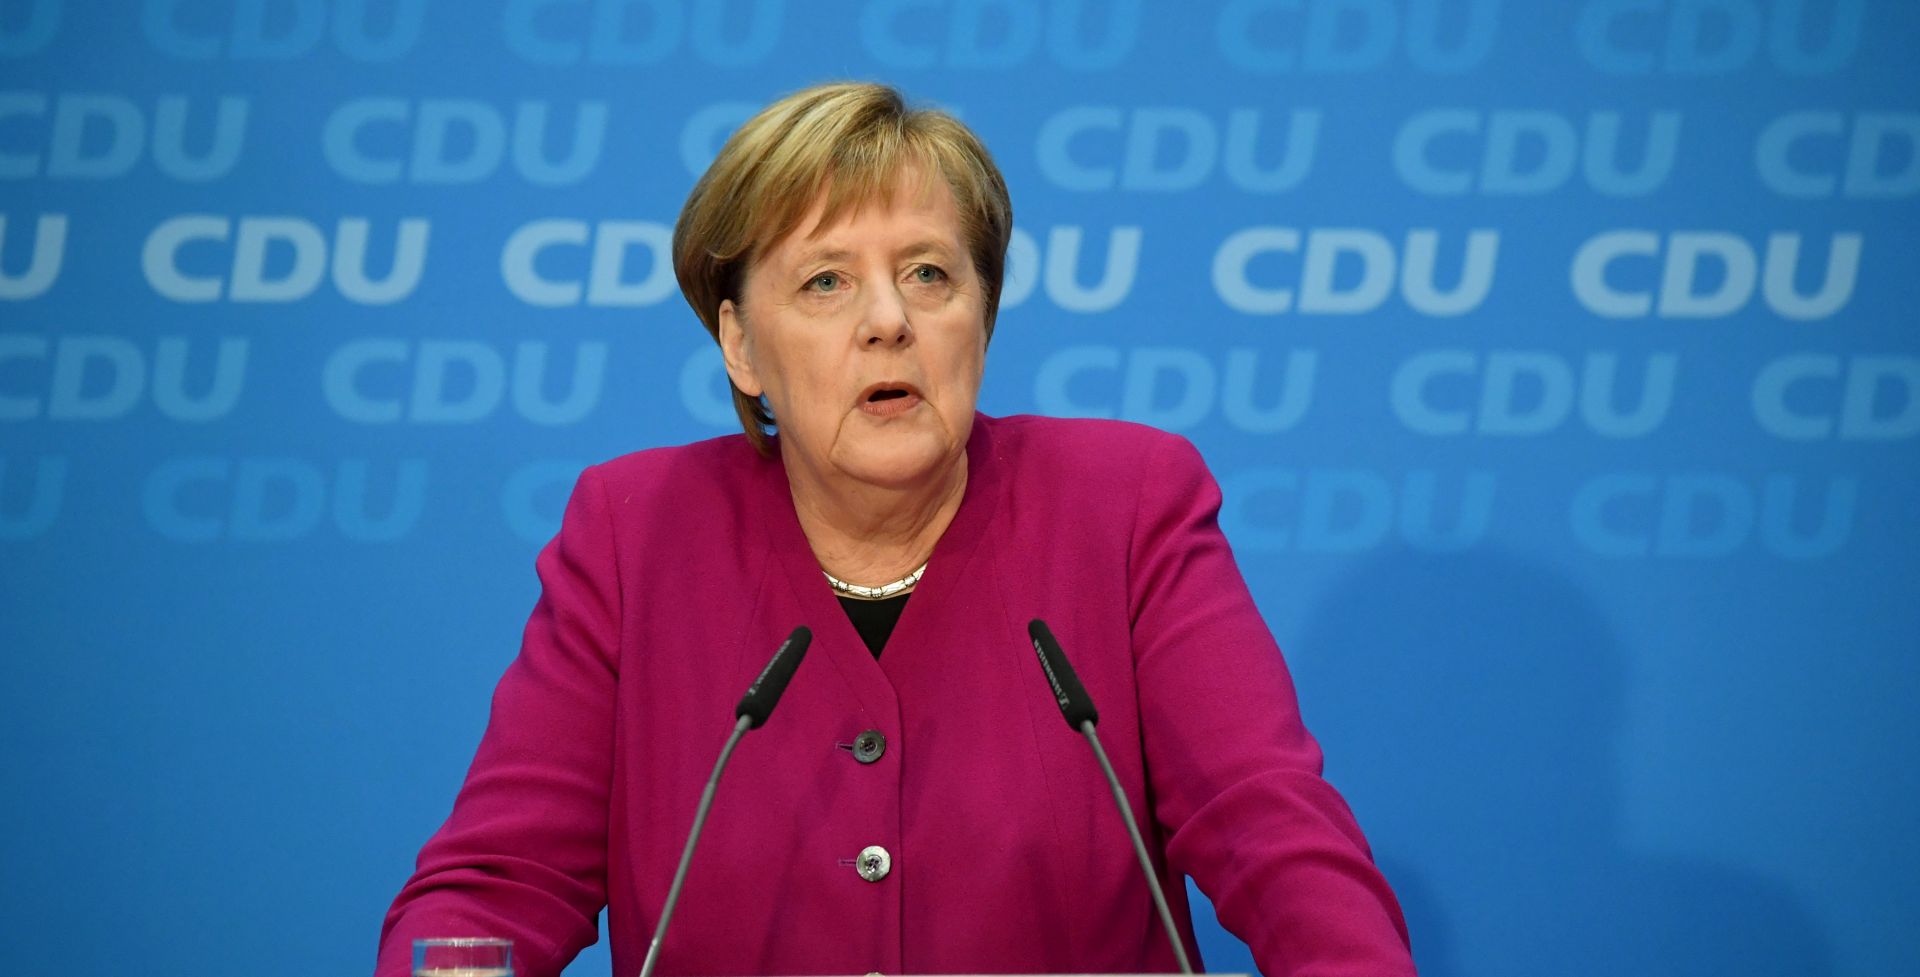 epa07129175 German Chancellor Angela Merkel speaks during a press conference after the board meeting of Christian Democratic Union (CDU) party in Berlin, Germany, 29 October 2018. According to reports, Merkel will not run for re-election as chairwoman of the CDU at the party convention on 07 December 2018.   EPA/CLEMENS BILAN